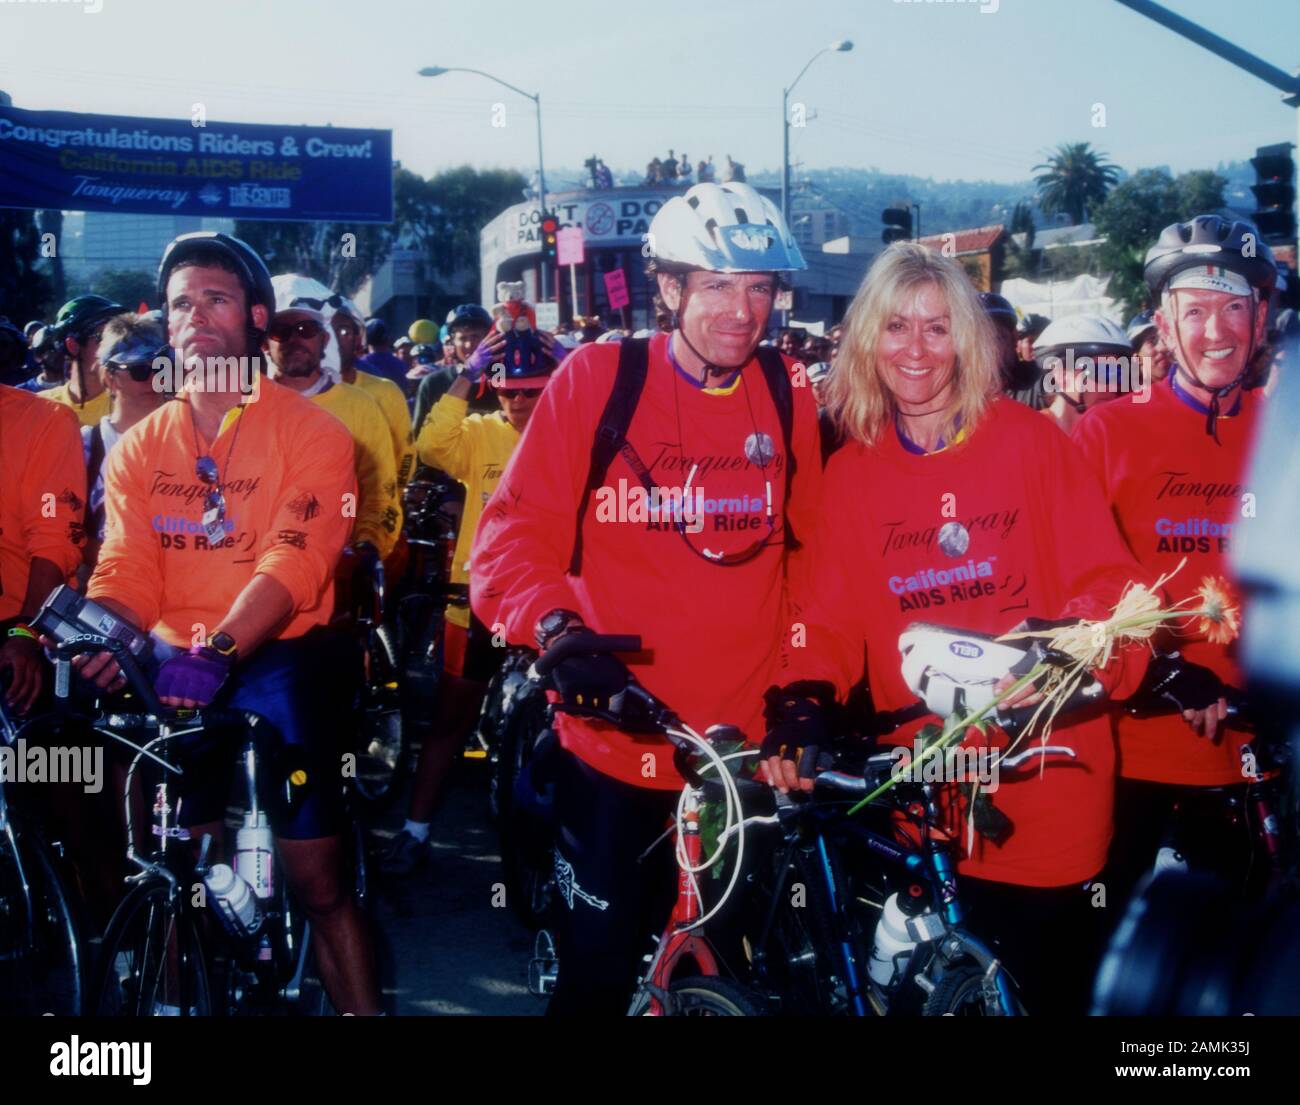 West Hollywood, California, USA 20th May 1995 (L-R) Actor Robert Desiderio and actress Judith Light attend California Aids Ride on May 20, 1995 in West Hollywood, California, USA. Photo by Barry King/Alamy Stock Photo Stock Photo